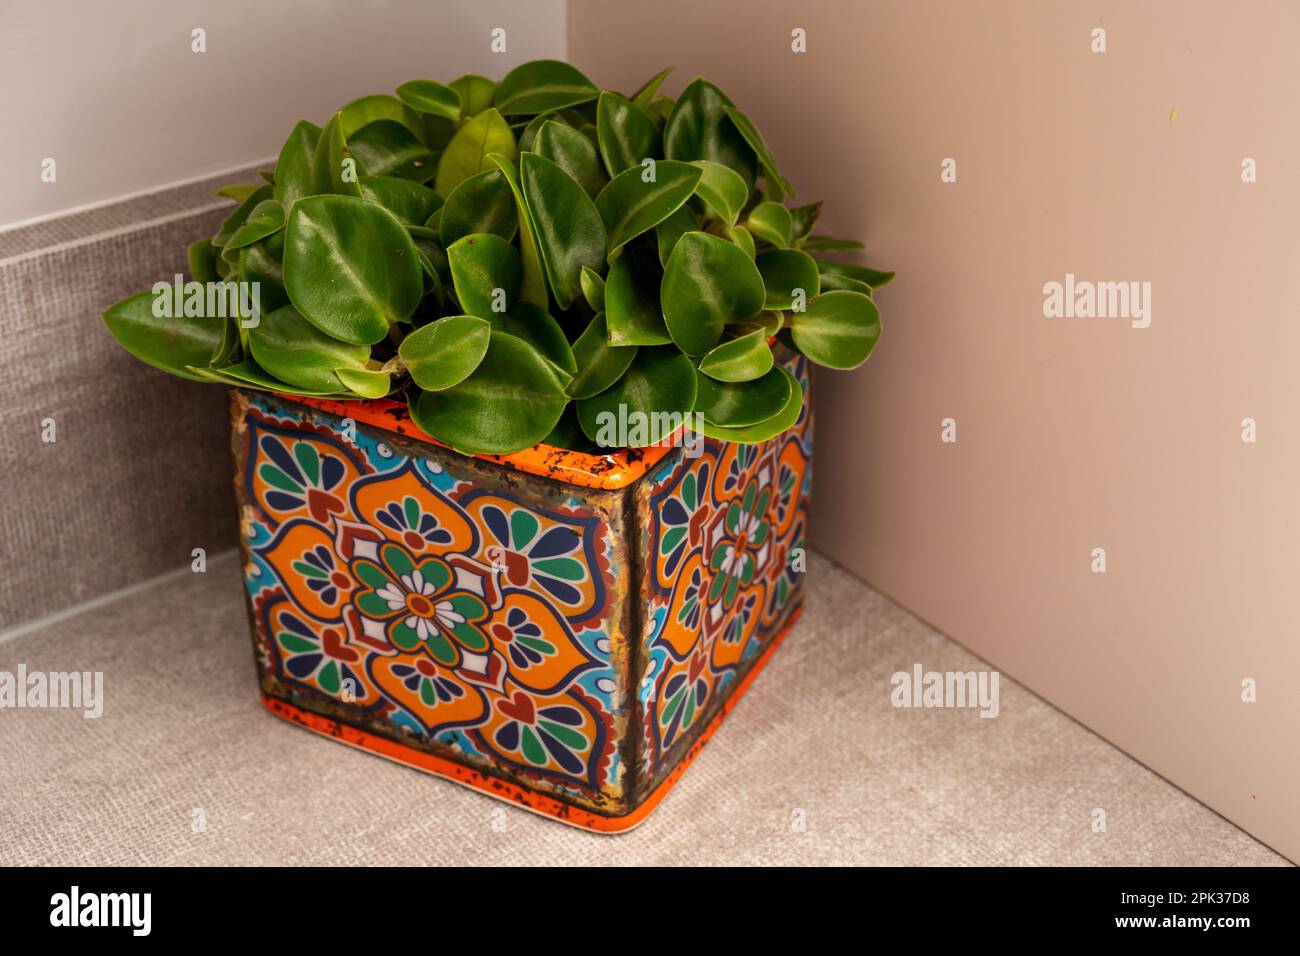 Peperomia orba 'Pixie' or Teardrop Peperomia, in a colorful patterned pot, indoors on a kitchen bench. Stock Photo